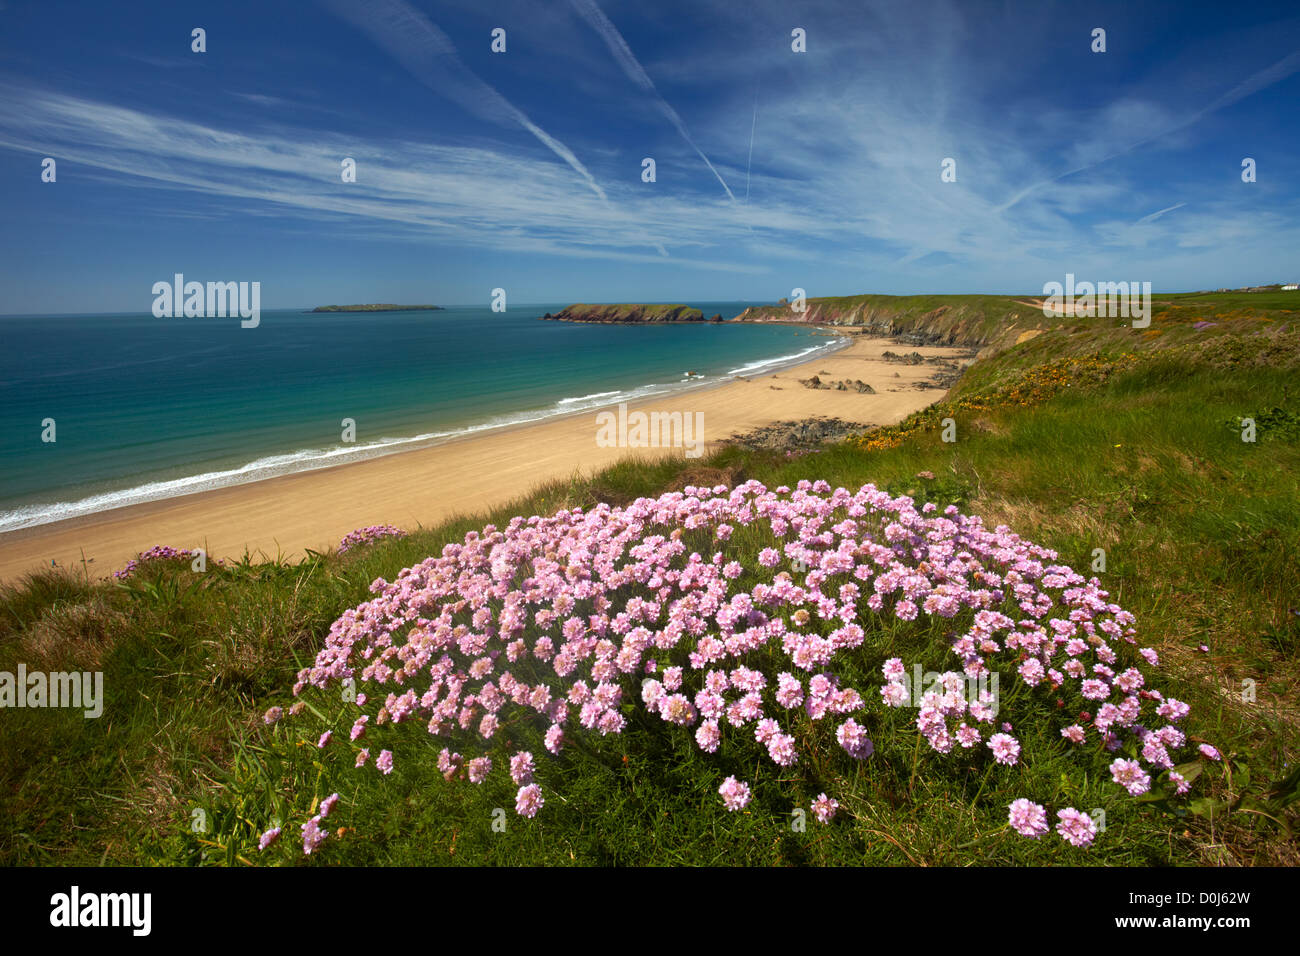 The wide sandy beach at Marloes from the Pembrokeshire Coastal Path. Stock Photo